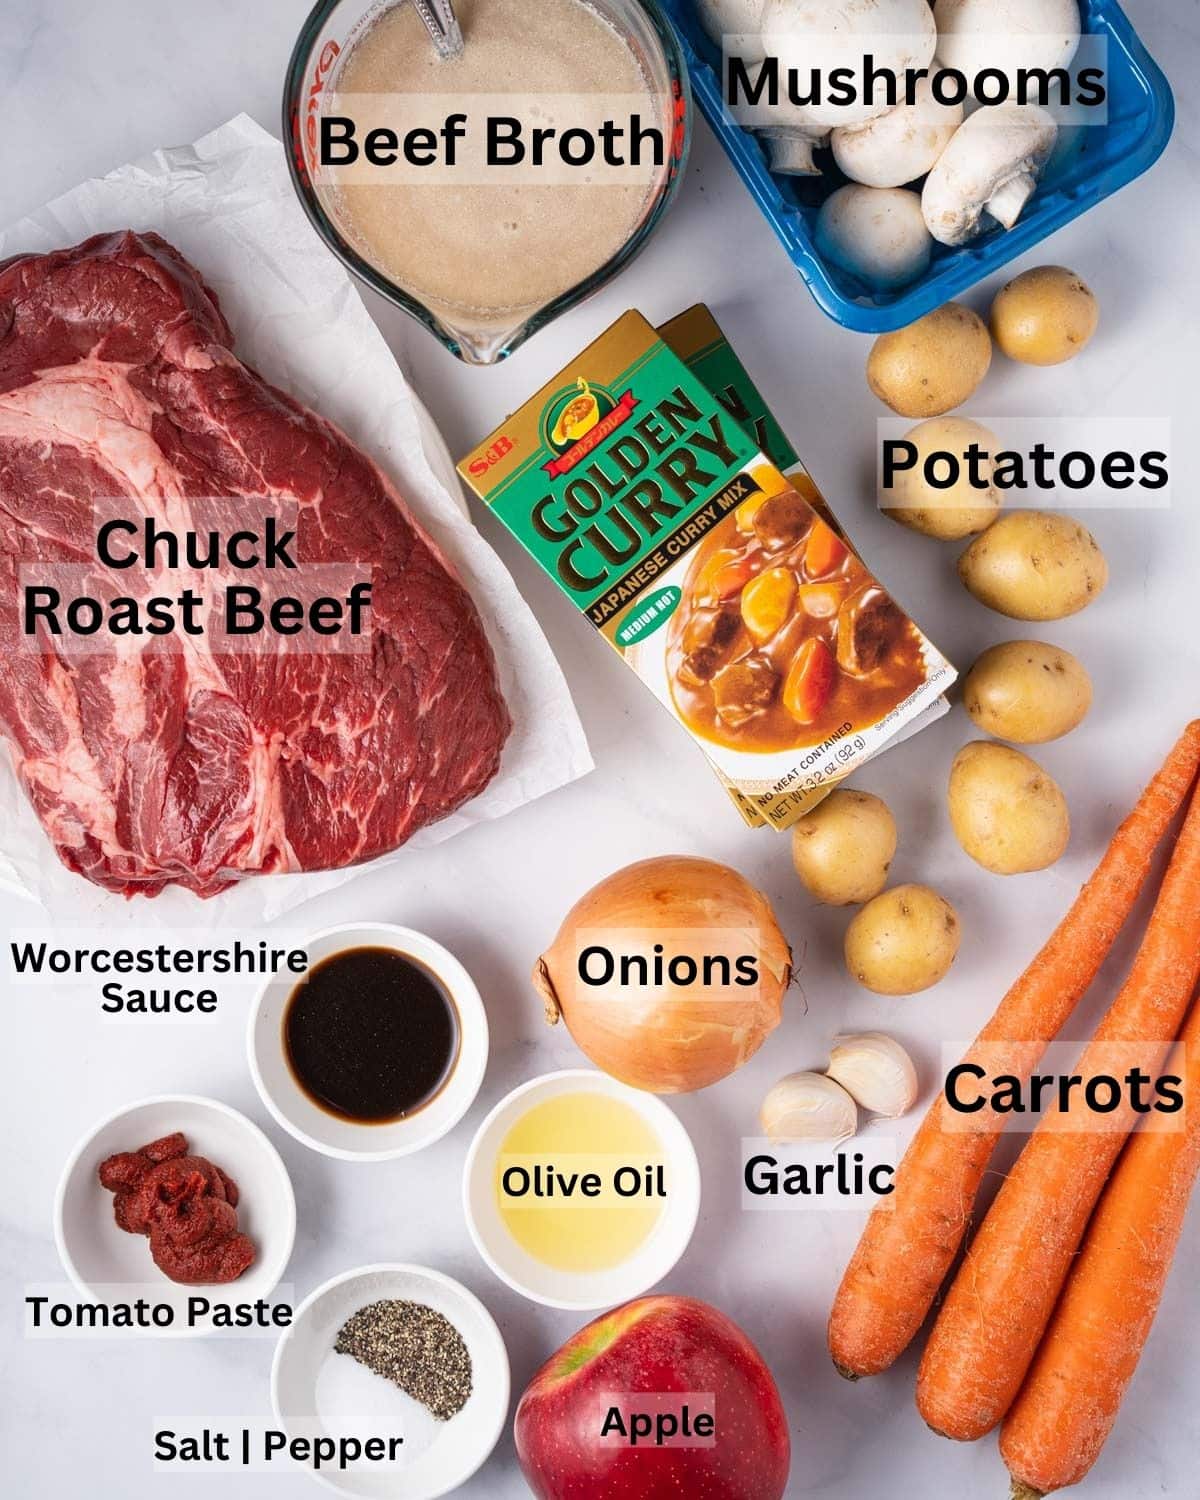 Ingredients needed for Instant Pot Japanese Curry: Chuck roast beef, beef broth, mushrooms, potatoes, carrots, onions, garlic, apple, Japanese curry roux, olive oil, Worcestershire sauce, tomato sauce, salt and pepper.